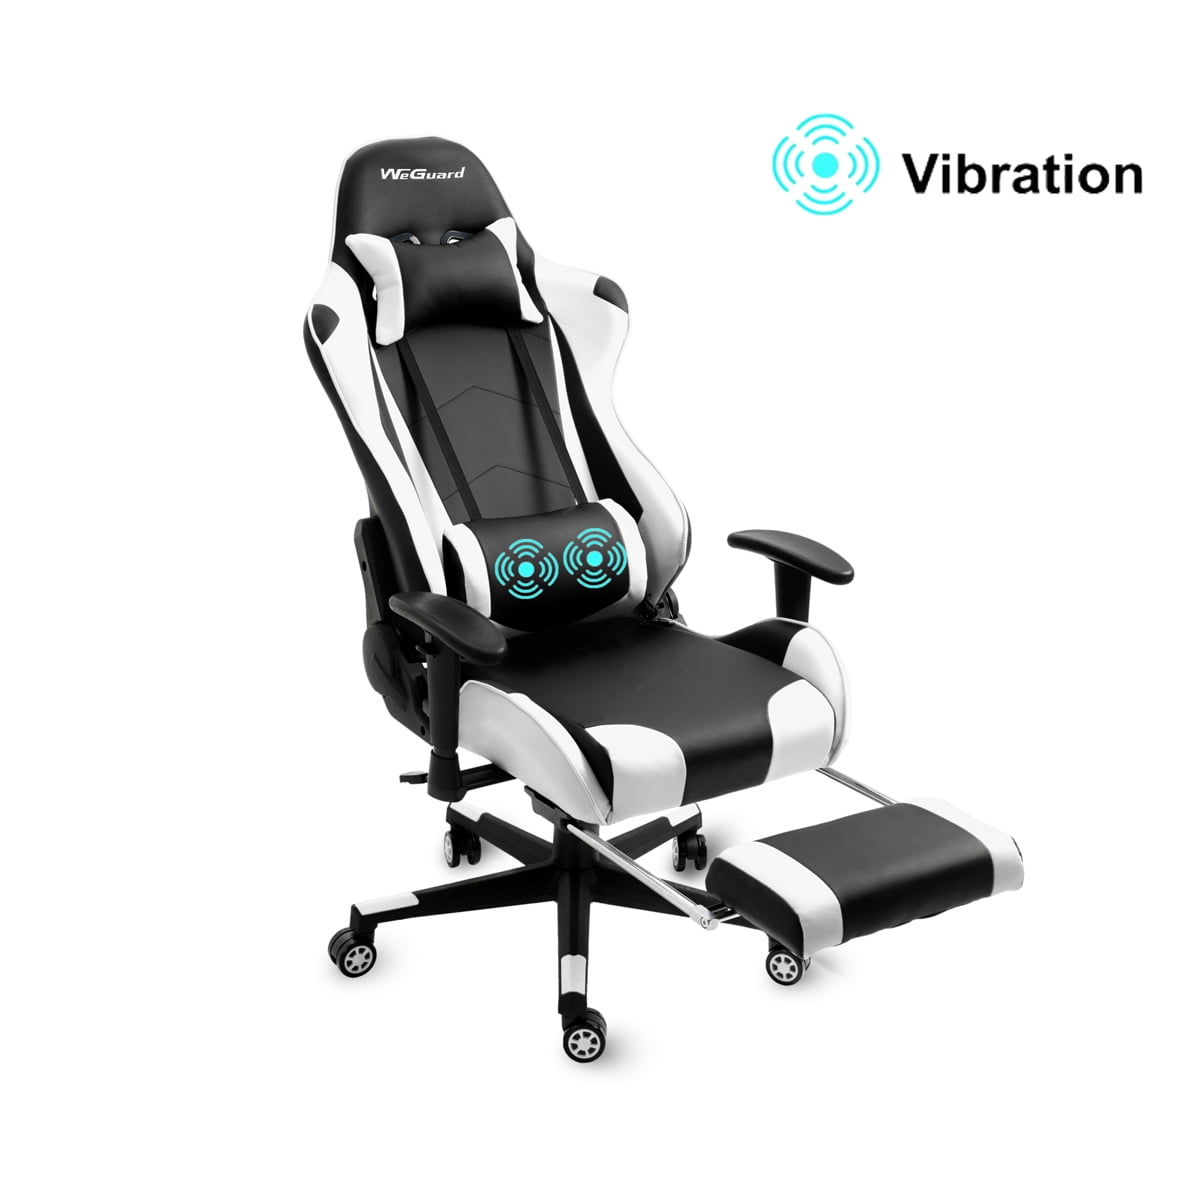 GANK PC Gaming Chair Ergonomic Office Chair High Back Ergonomic Video Game Chair Premium PU Leather Racing Style Gaming Computer Chair Recliner with Adjustable Massage Lumbar Support and Footrest Red-01